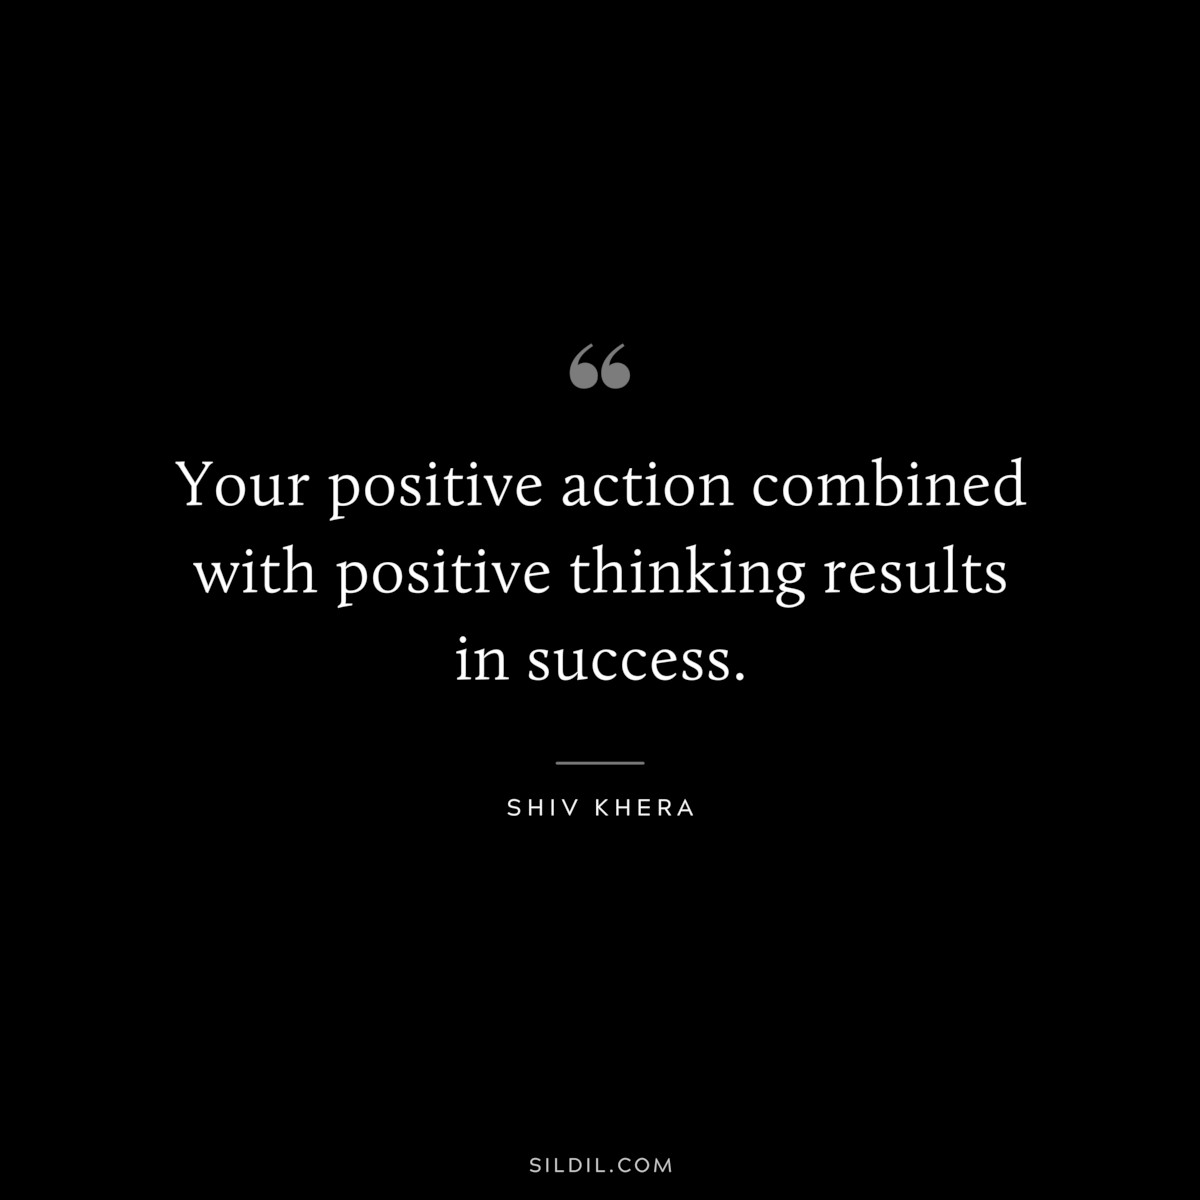 Your positive action combined with positive thinking results in success. ― Shiv Khera